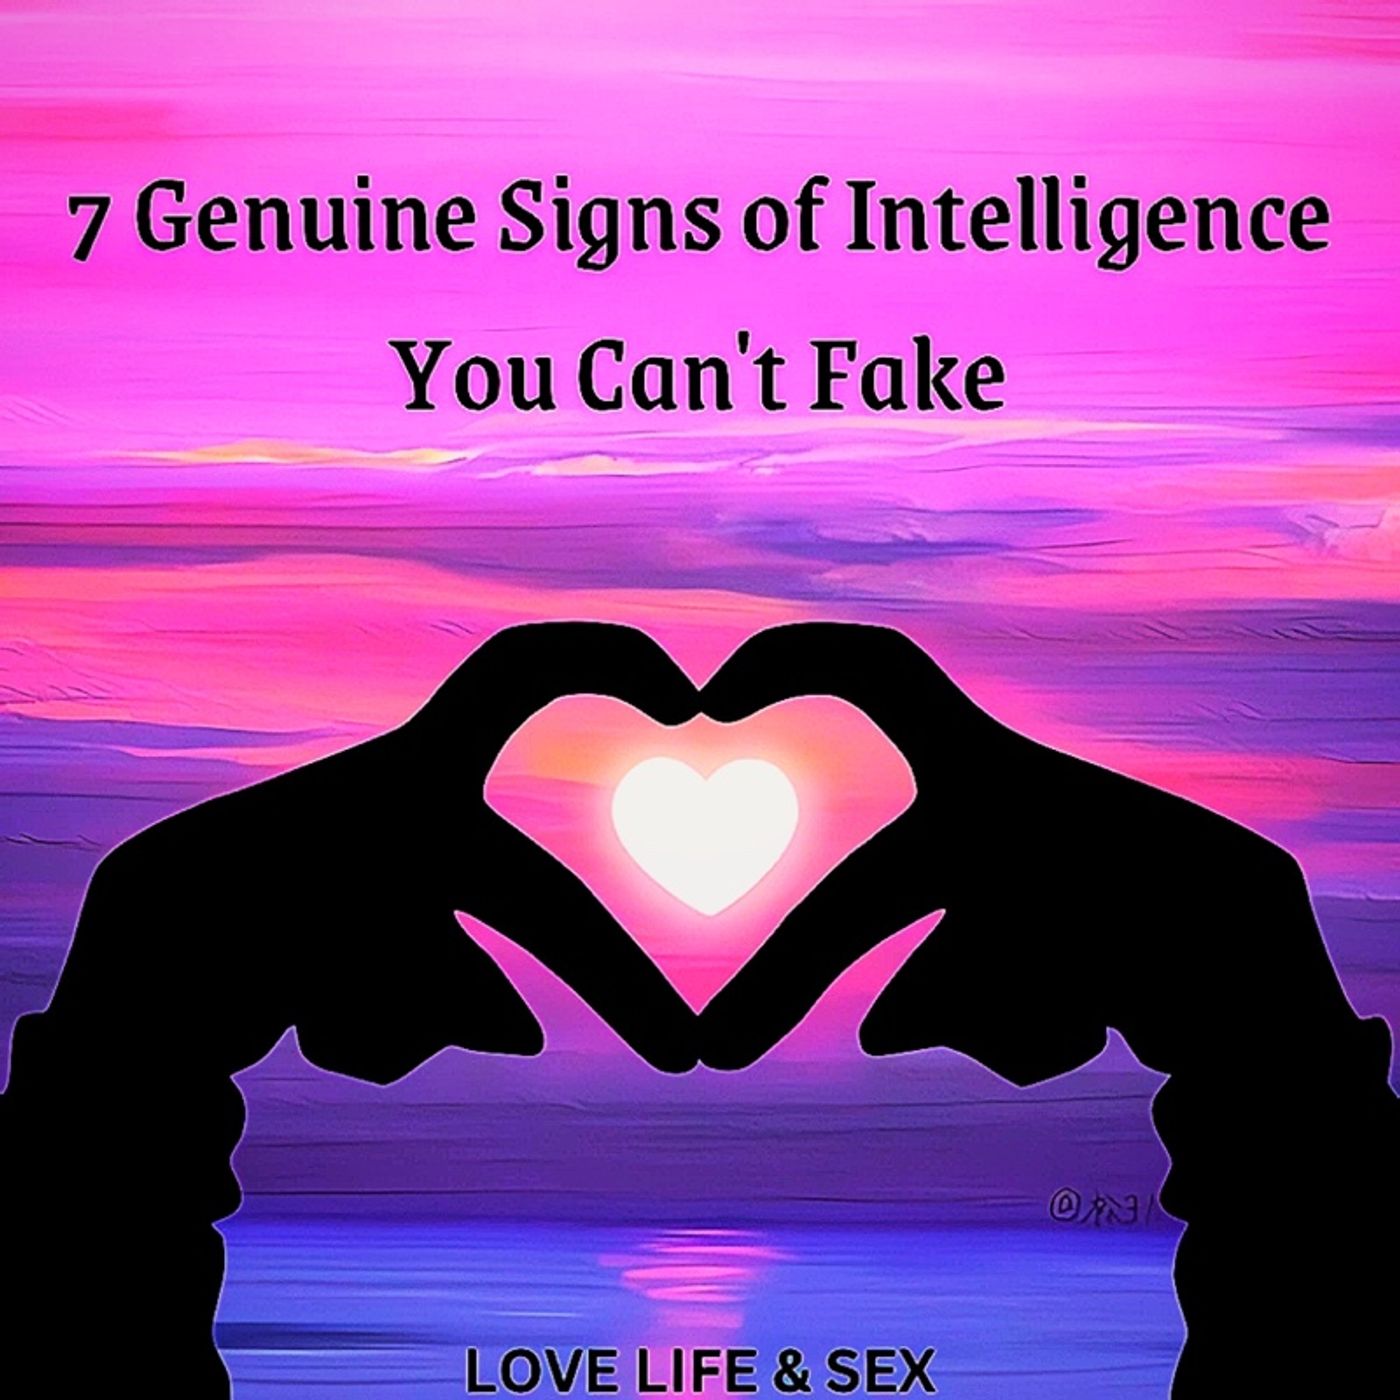 7 Genuine Signs of Intelligence 🧠 You Can't Fake